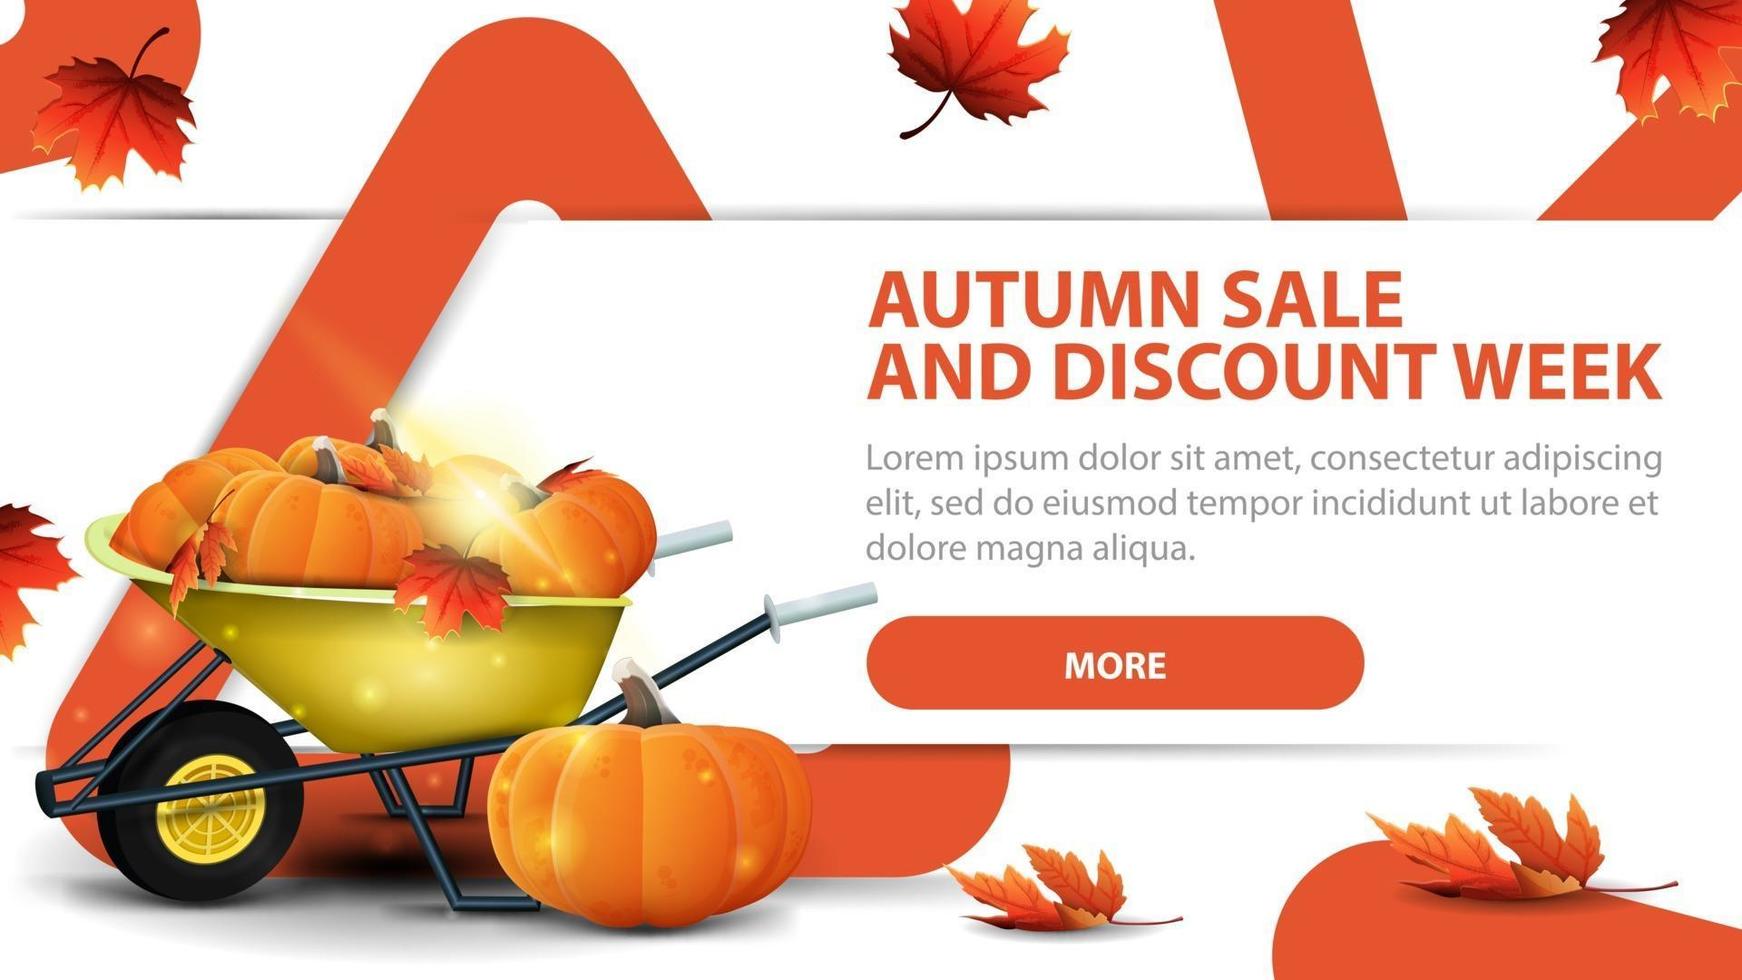 Autumn sale and discounts week, banner with a harvest of pumpkins vector